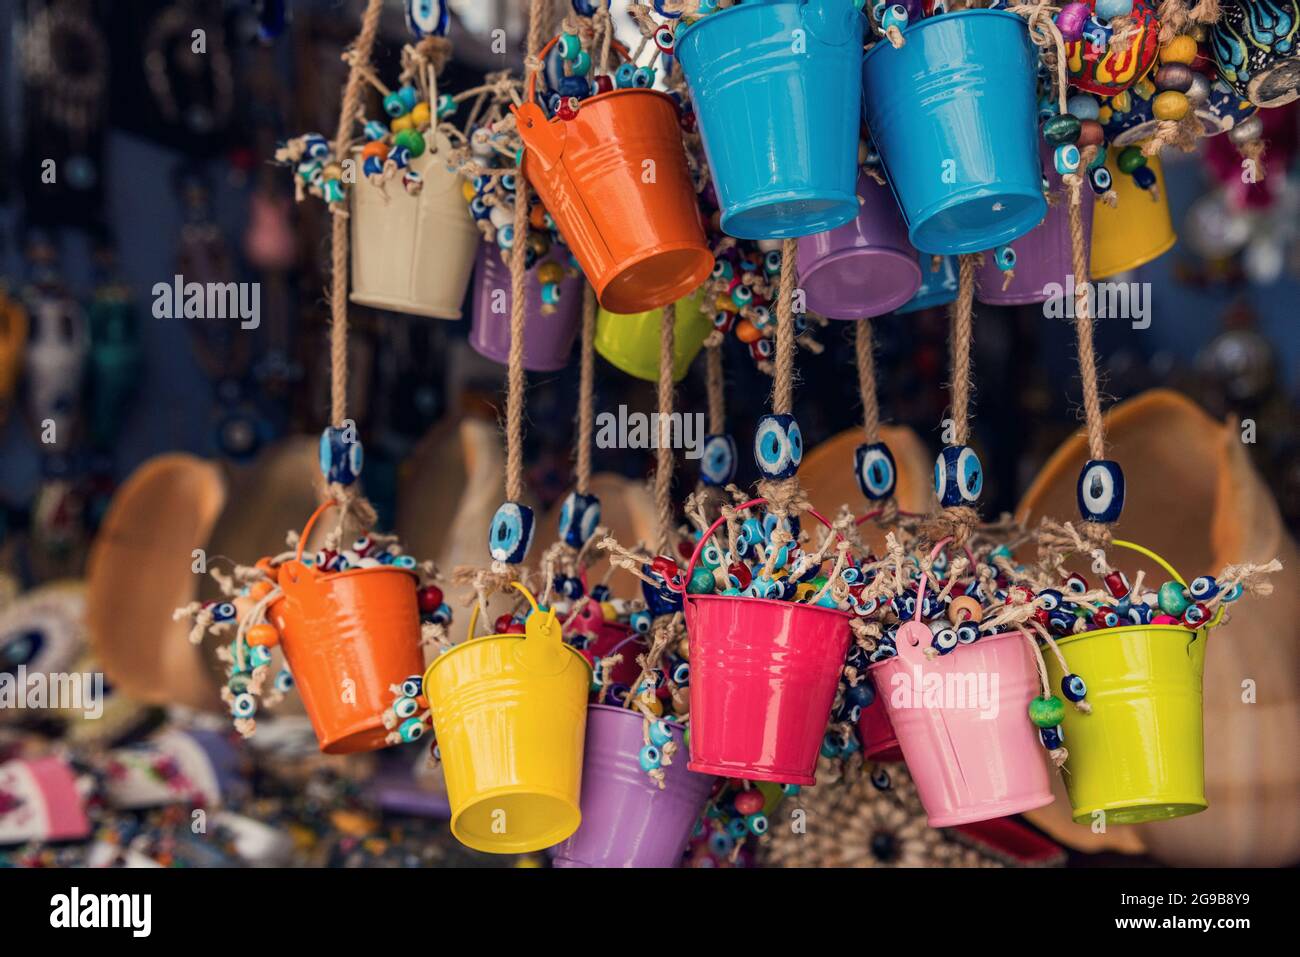 Colorful handmade  amulet decorations in a outdoor souvenir shop, close up Stock Photo